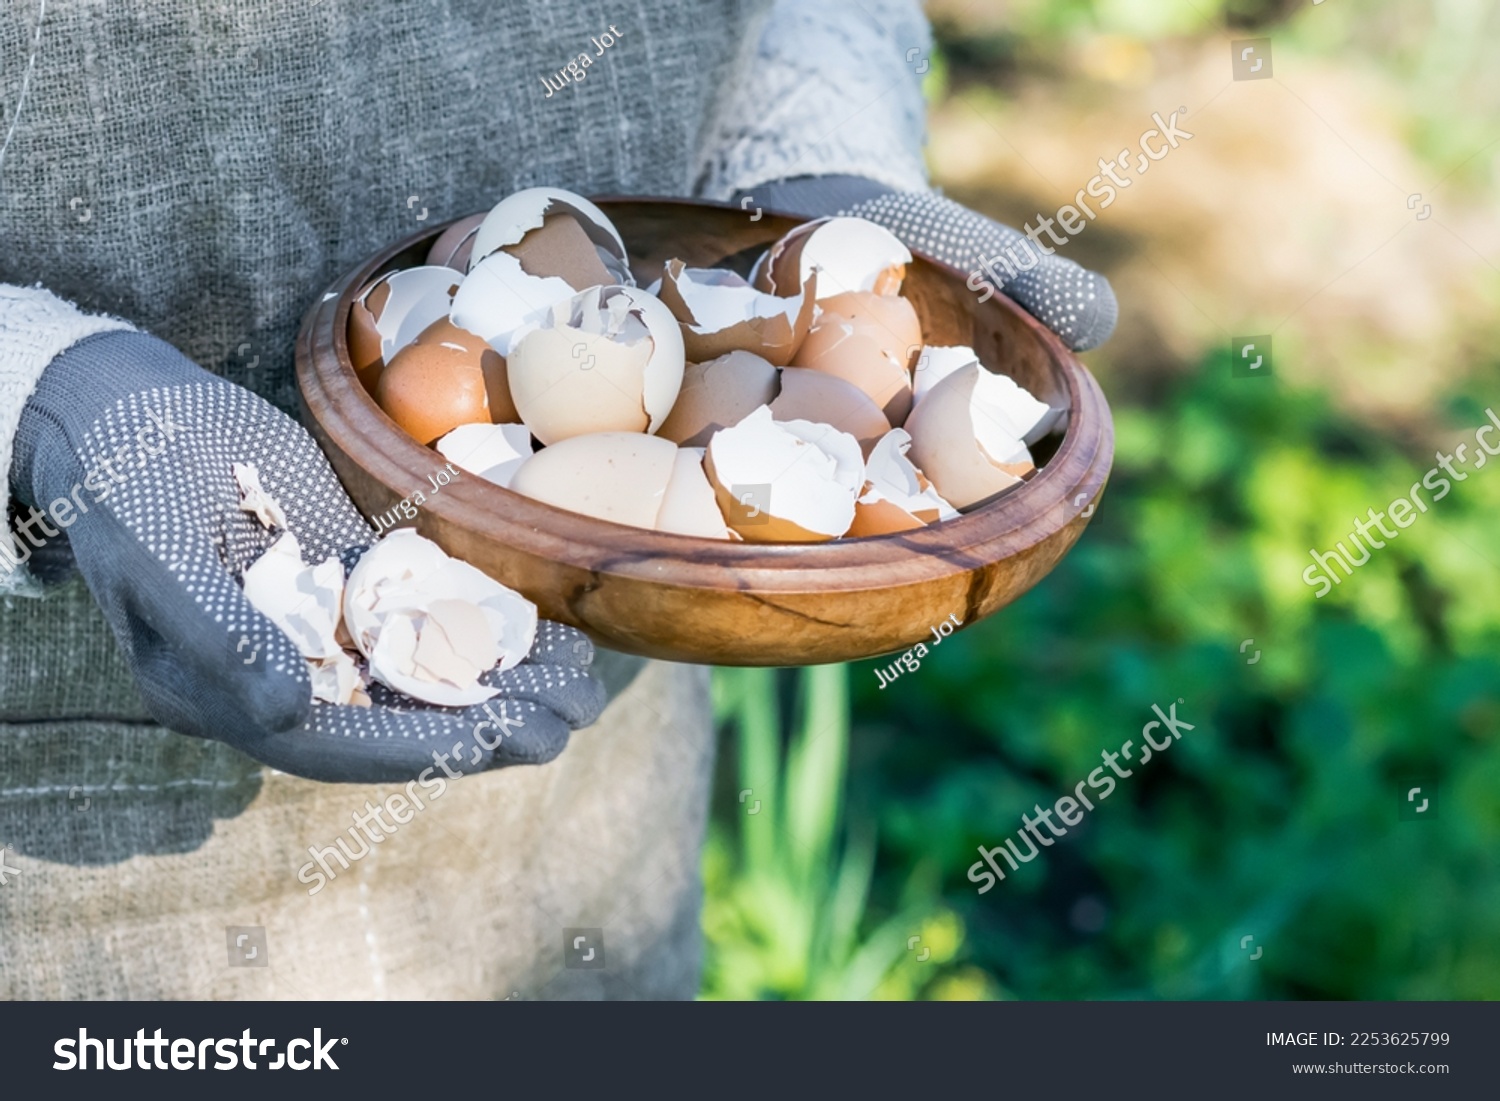 Brown and white eggshells placed in wooden bowl in hands of woman in vegetable garden background, eggshells stored for making natural fertilizers for growing vegetables, sustainability concept #2253625799